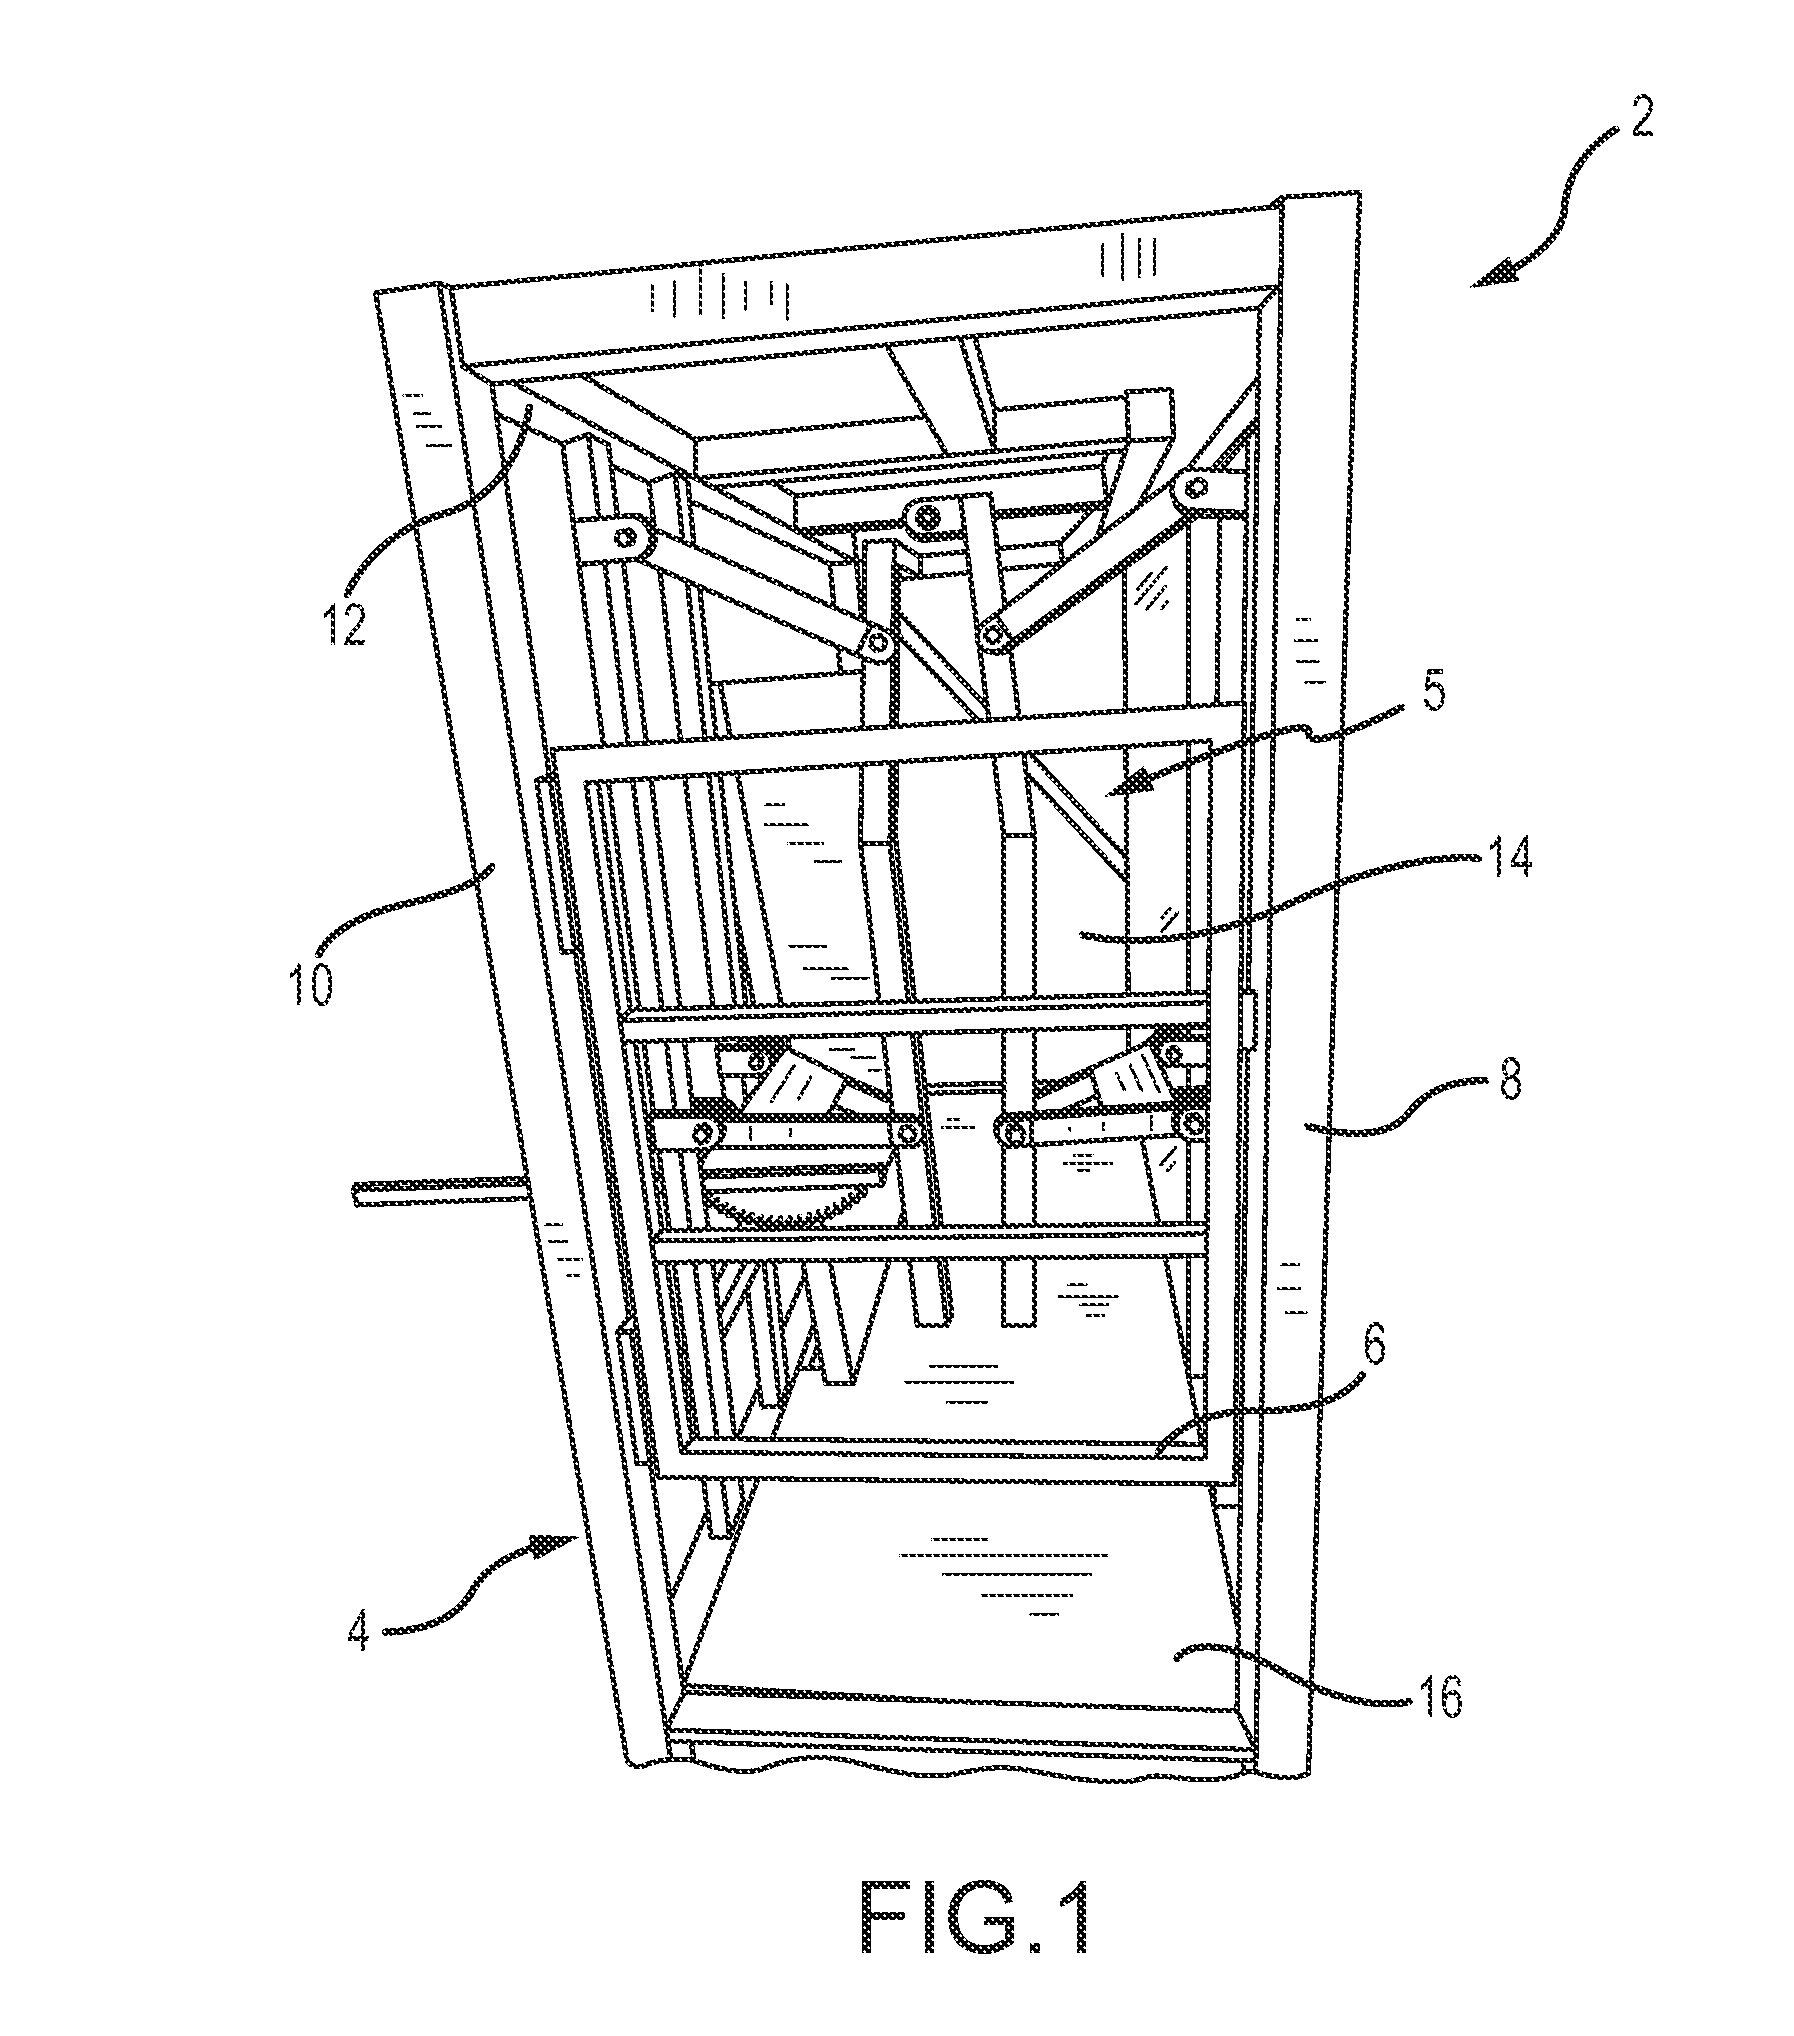 System and method for restraining and handling livestock